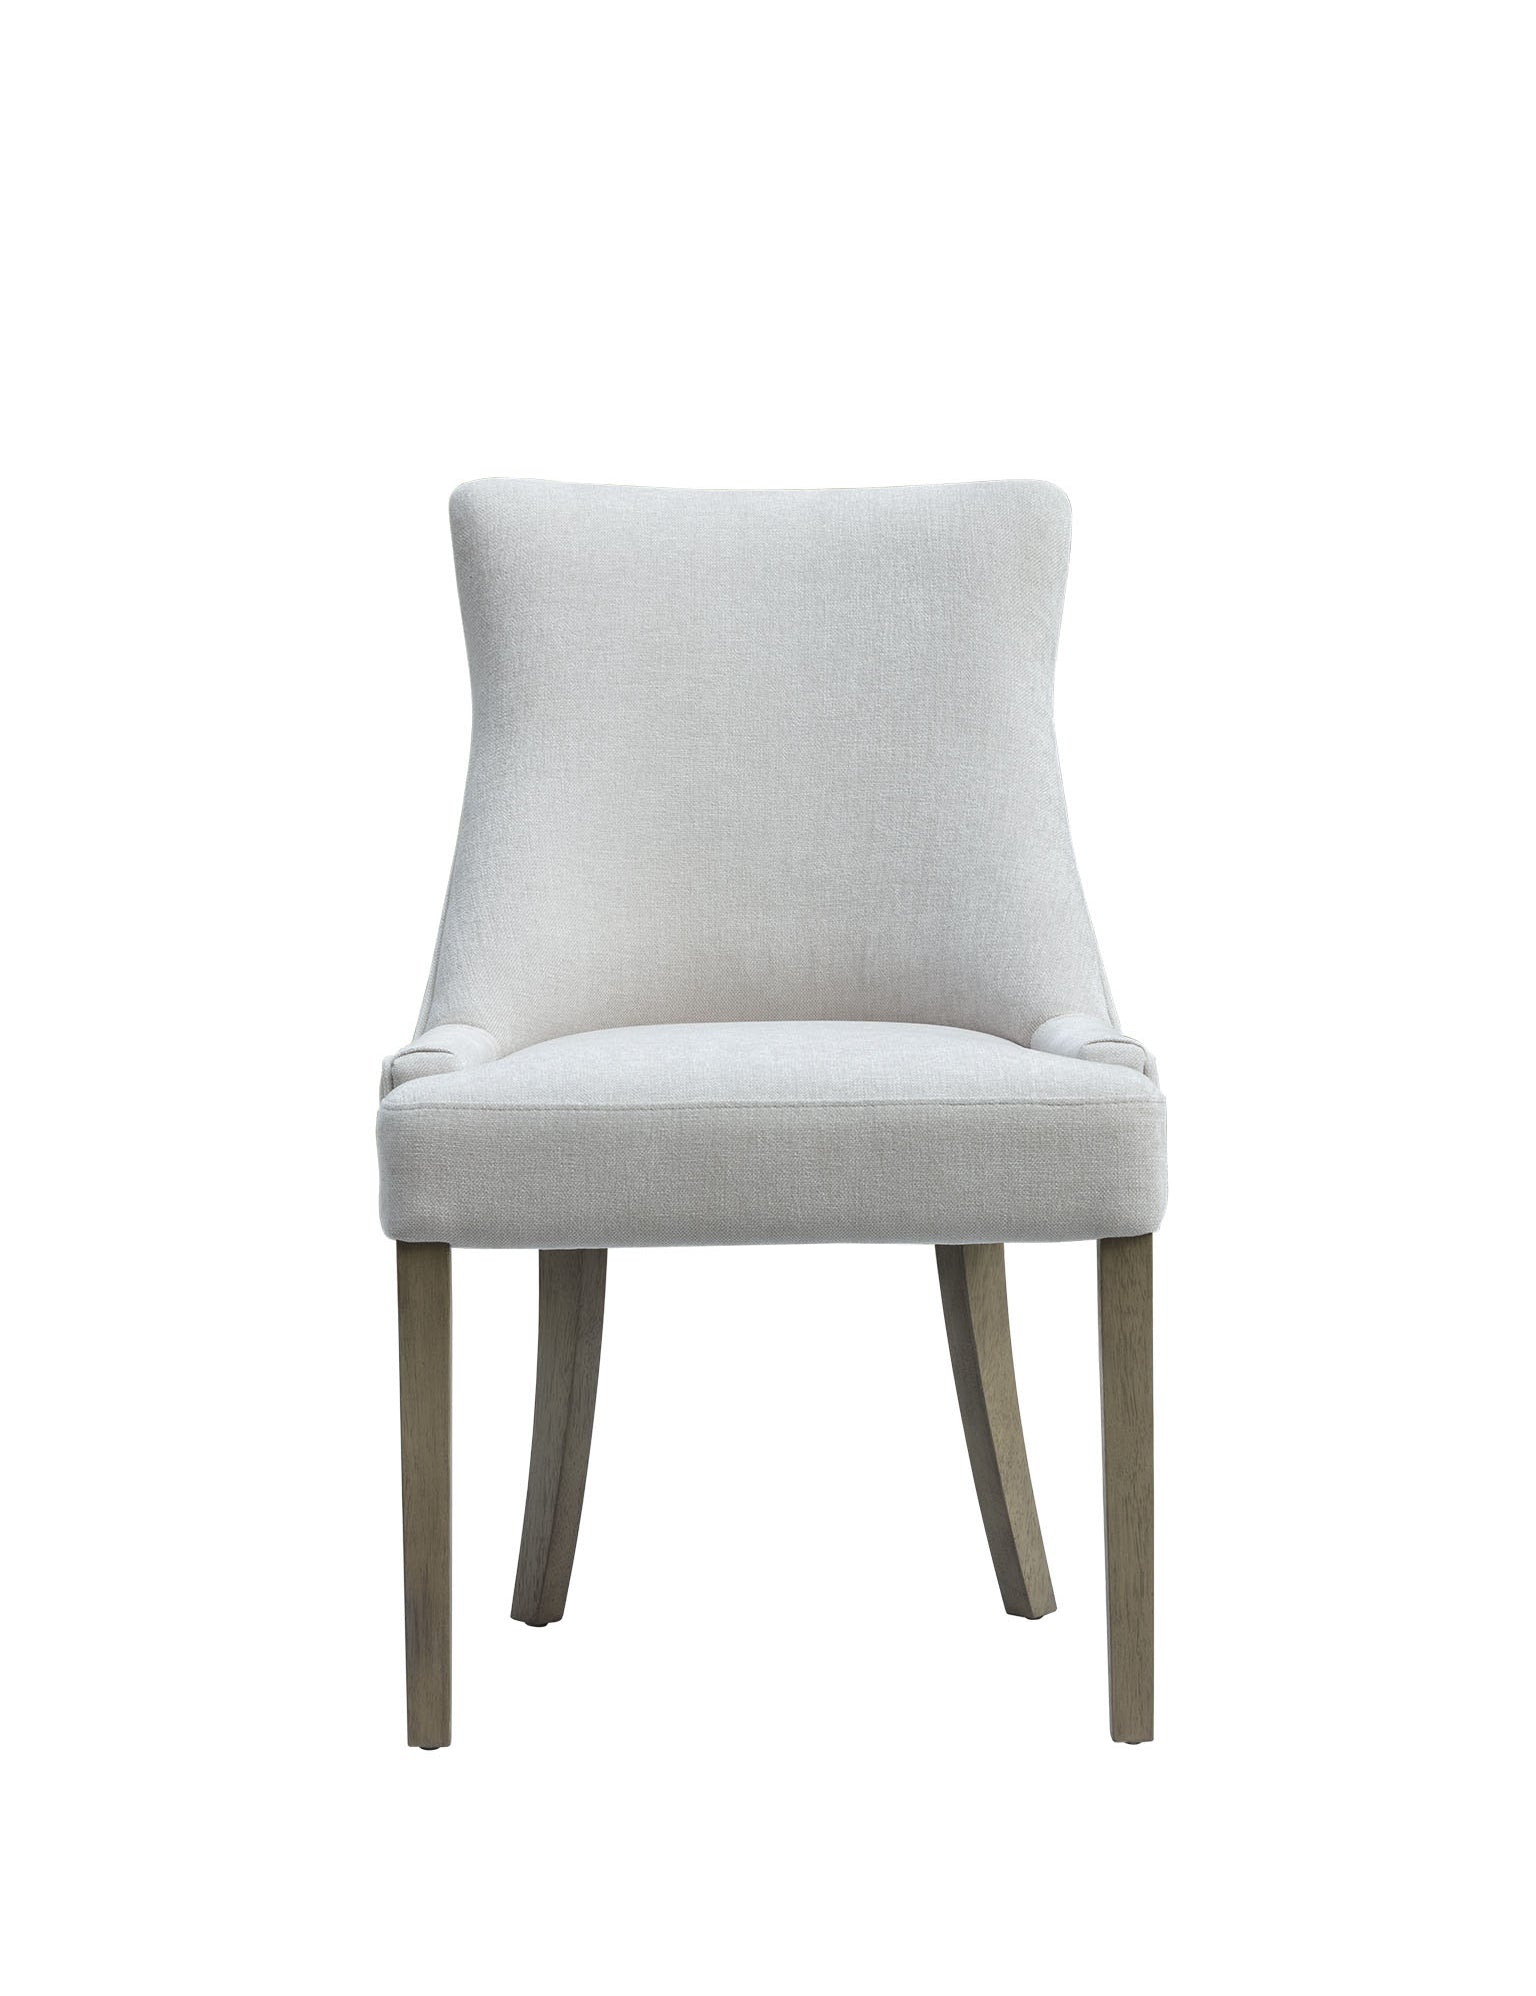 Oreilla Chenille Dining Chair with Aged Oak Legs